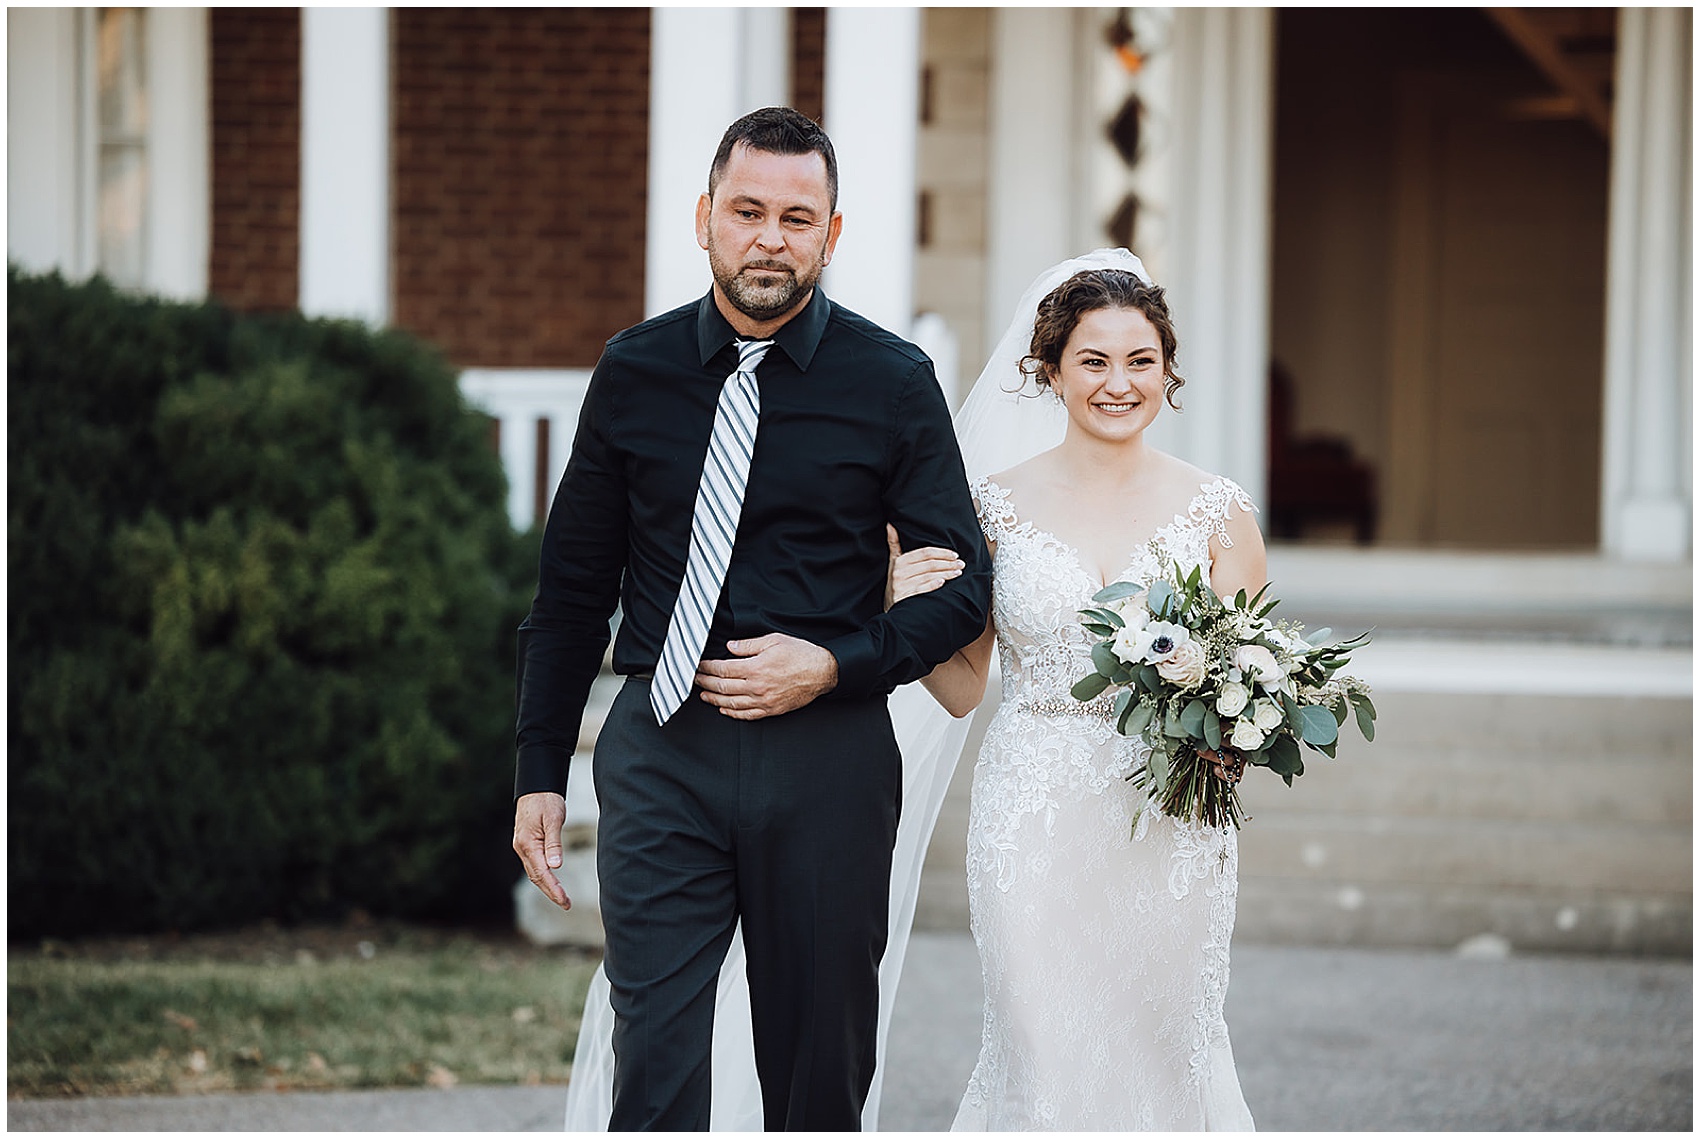 Father walks his daughter down the aisle for her wedding PLS Coordinate